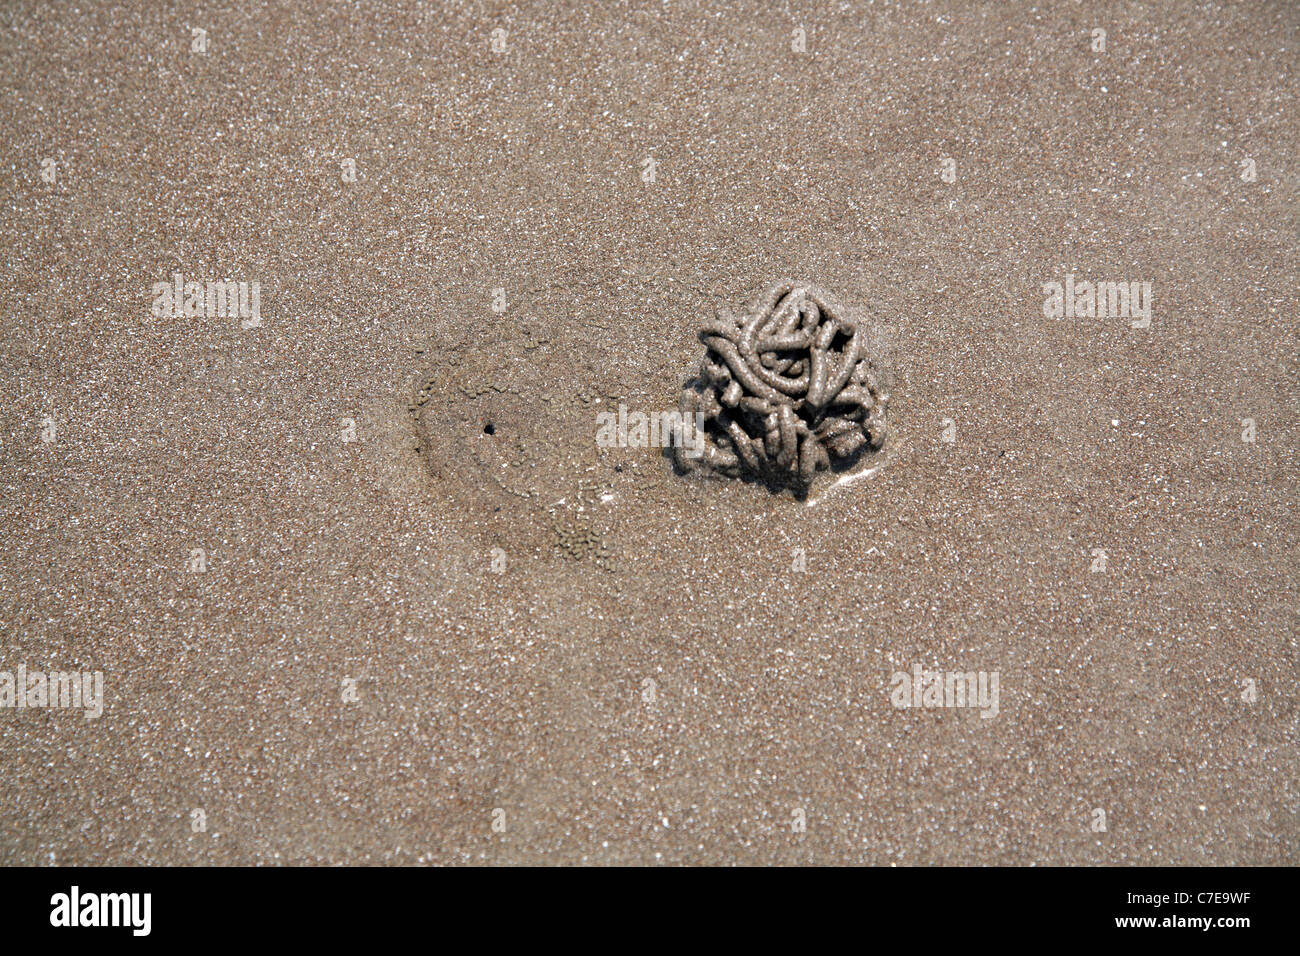 Beach, sand and other things. A crab hole filled by the waves of the tide. Stock Photo